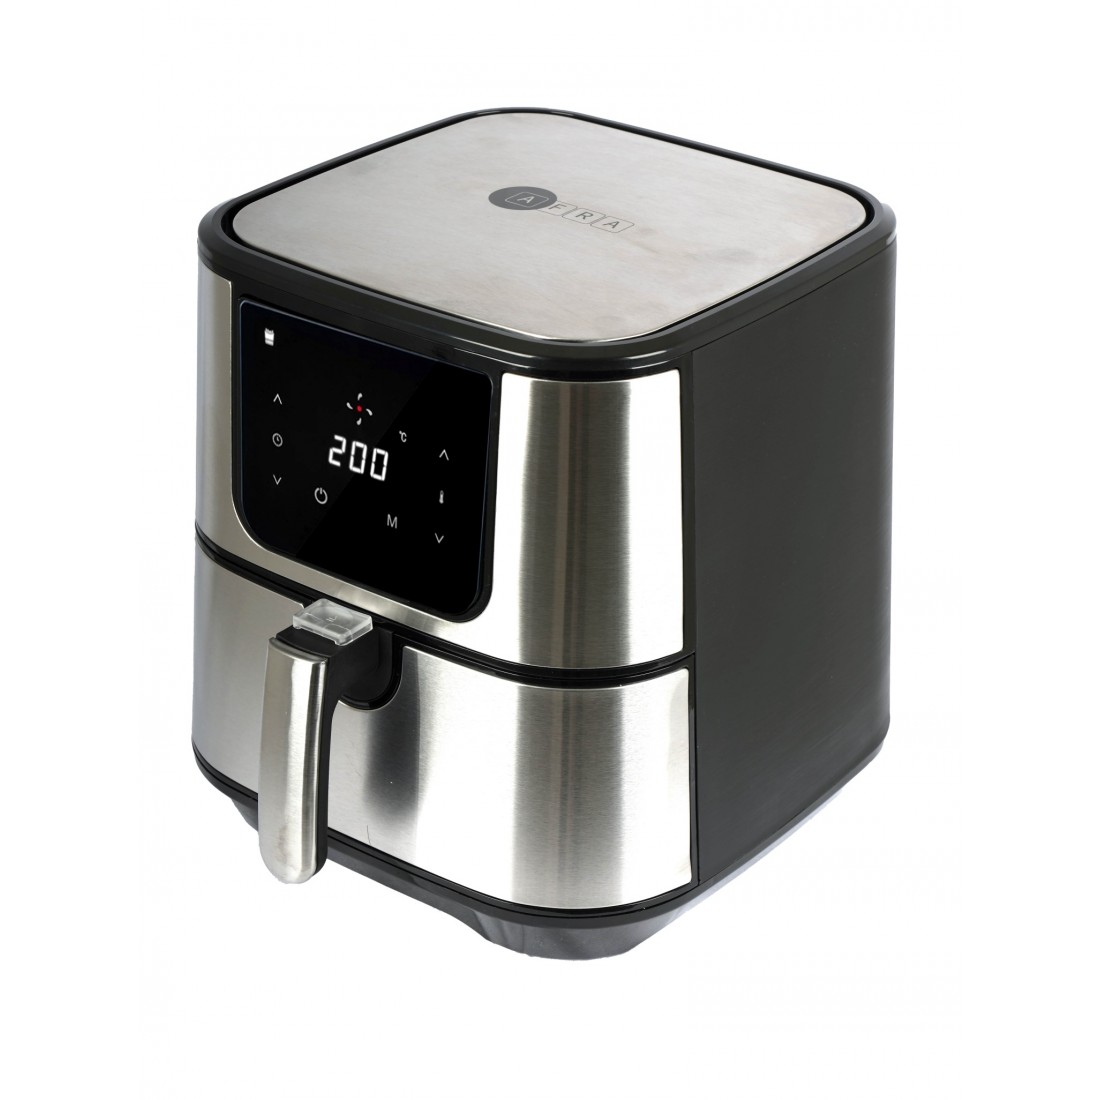 AFRA Air Fryer, 1600-1800W, 5.5L Capacity, Adjustable Temperature, Overheat Protection, Non-Slip Feet, Cool Touch Handle, G-MARK, ESMA, ROHS, And CB Certified, AF-5518AFSS, 2 Years Warranty